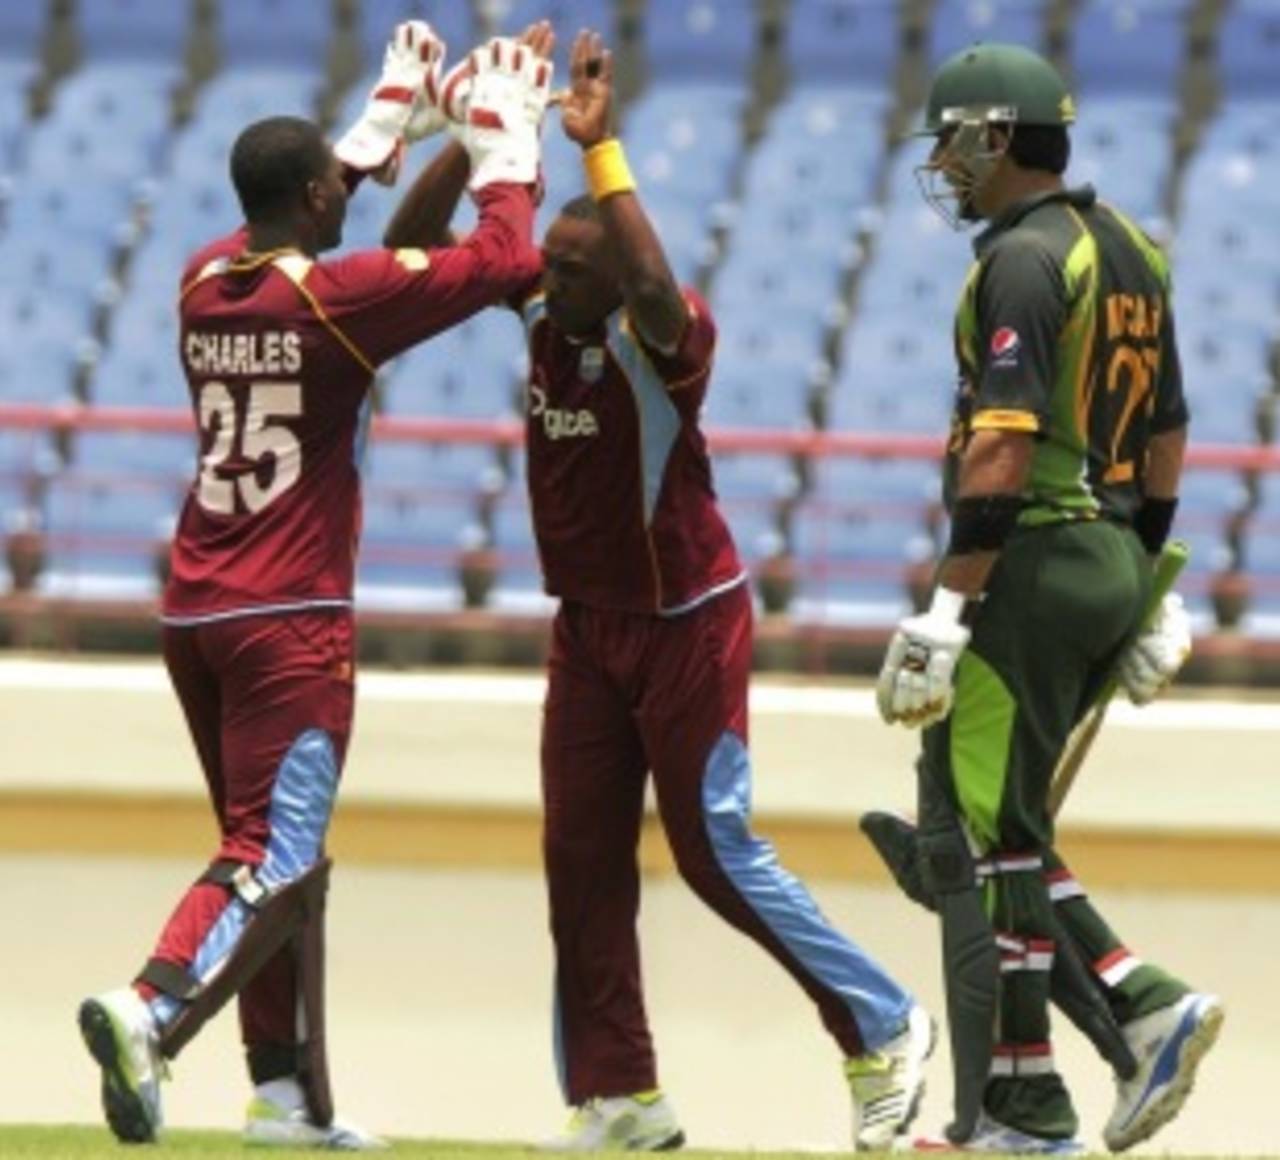 It would be naïve to believe the incorrect short-run call had any bearing on the end result&nbsp;&nbsp;&bull;&nbsp;&nbsp;WICB